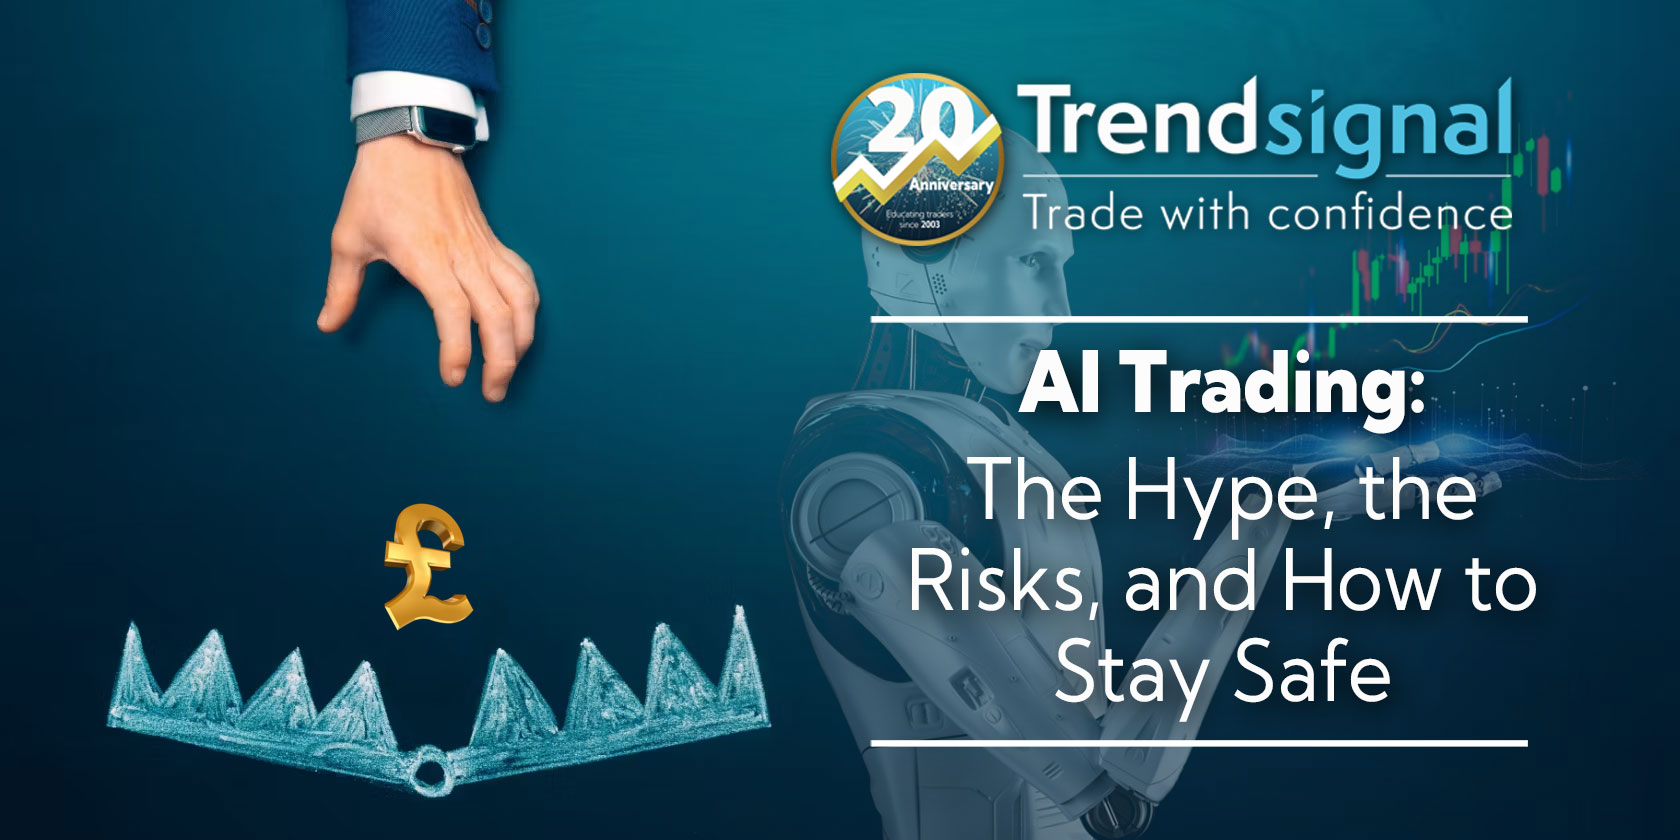 AI Trading: The Hype, the Risks, and How to Stay Safe